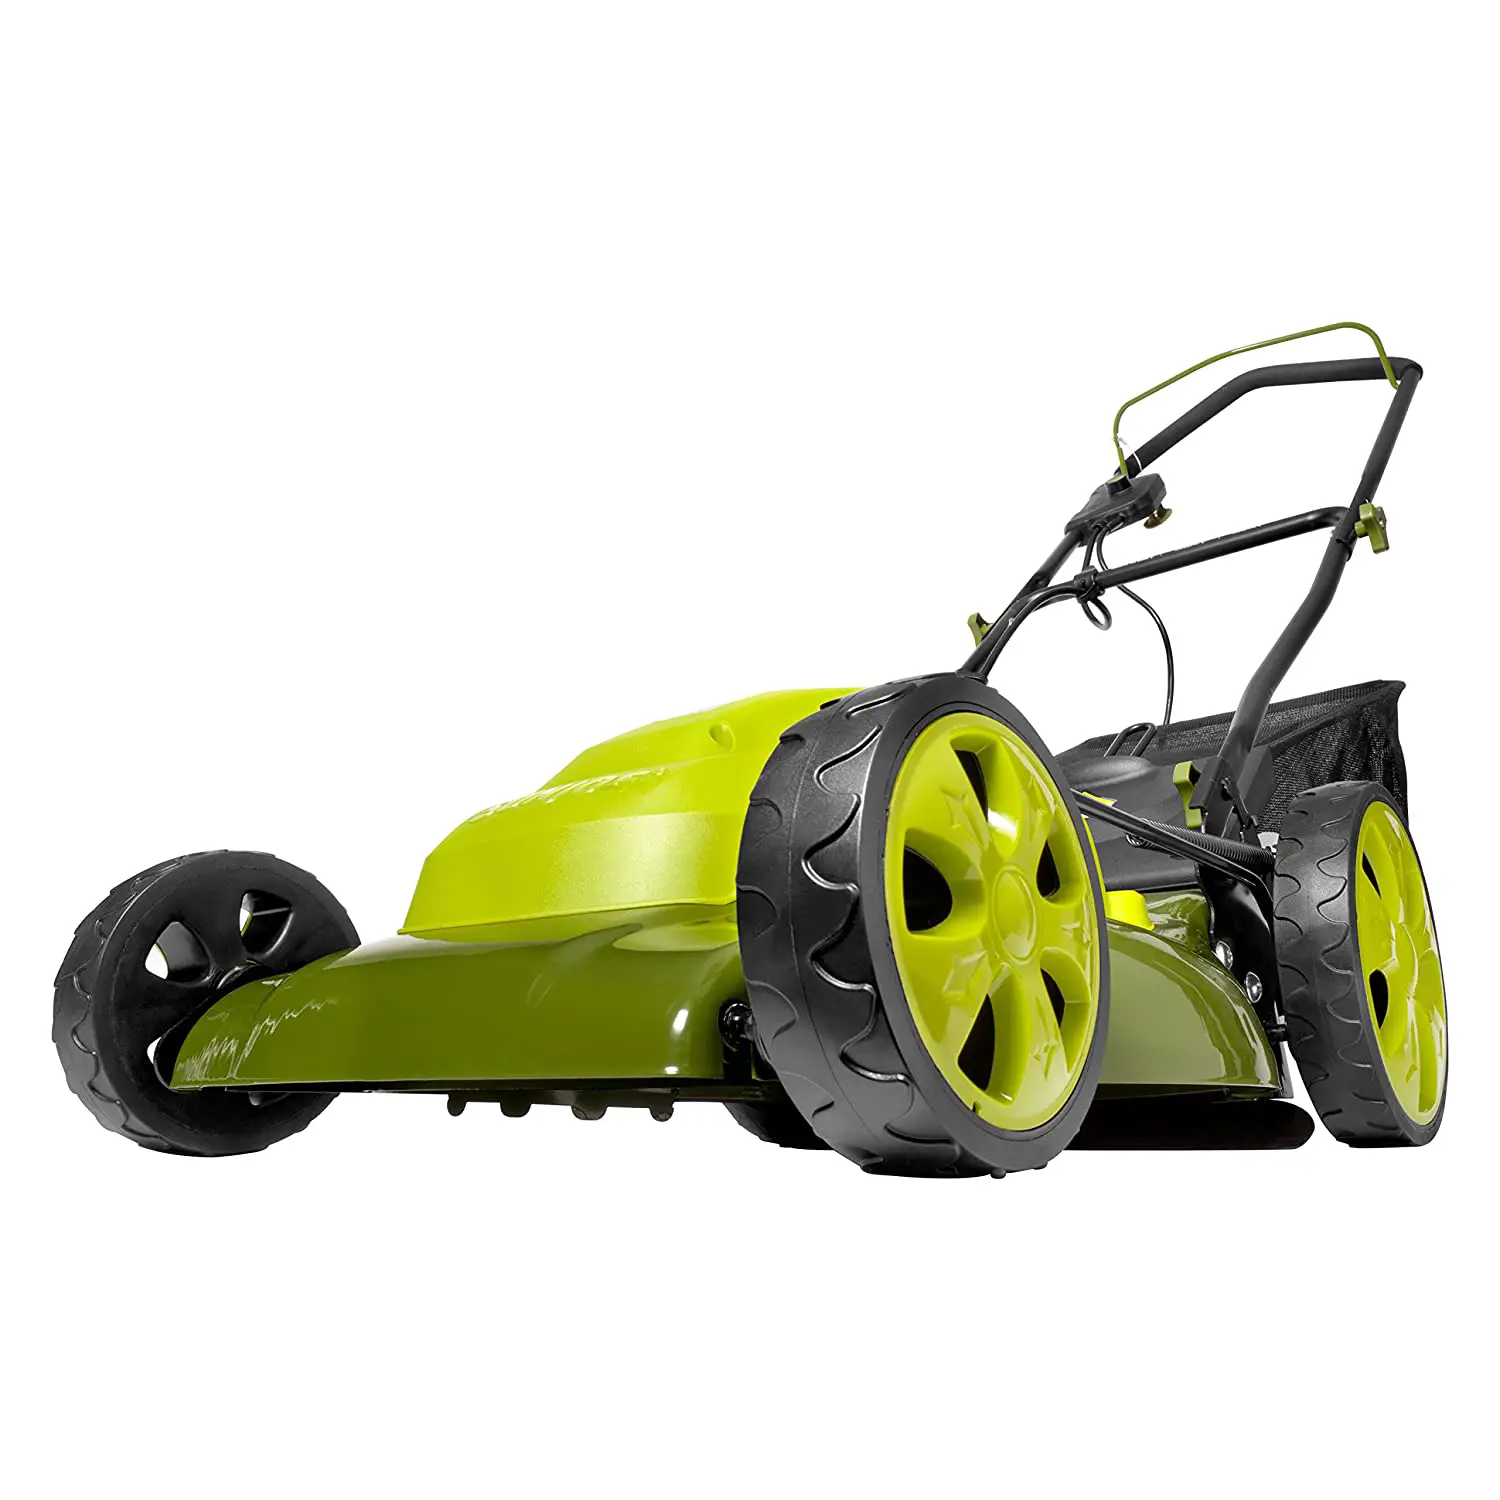 Best old lawn tractor disposal